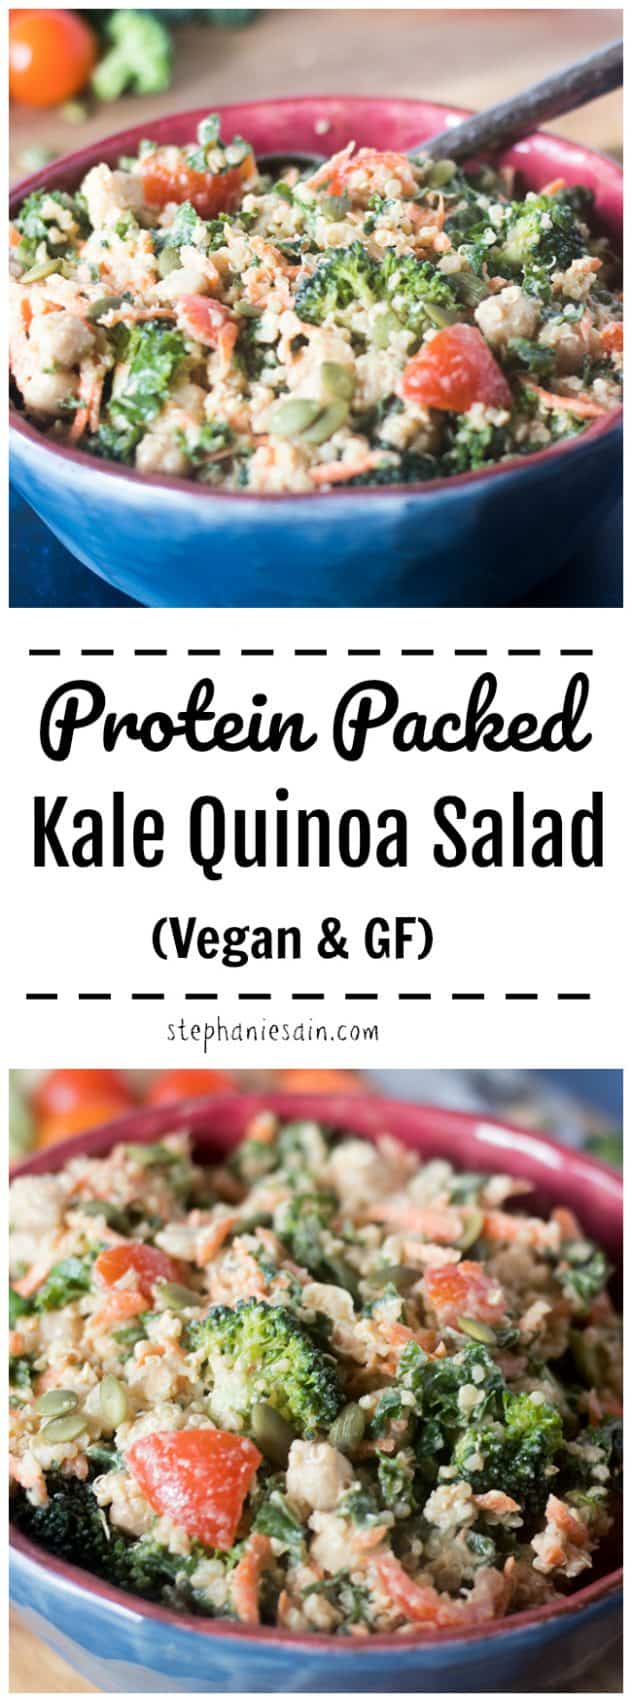 This Kale Quinoa Salad is loaded with lots of fresh veggies and quinoa. Then dressed with a lemon tahini dressing. A great make ahead salad perfect for quick easy lunches and dinners. Vegan & Gluten Free.